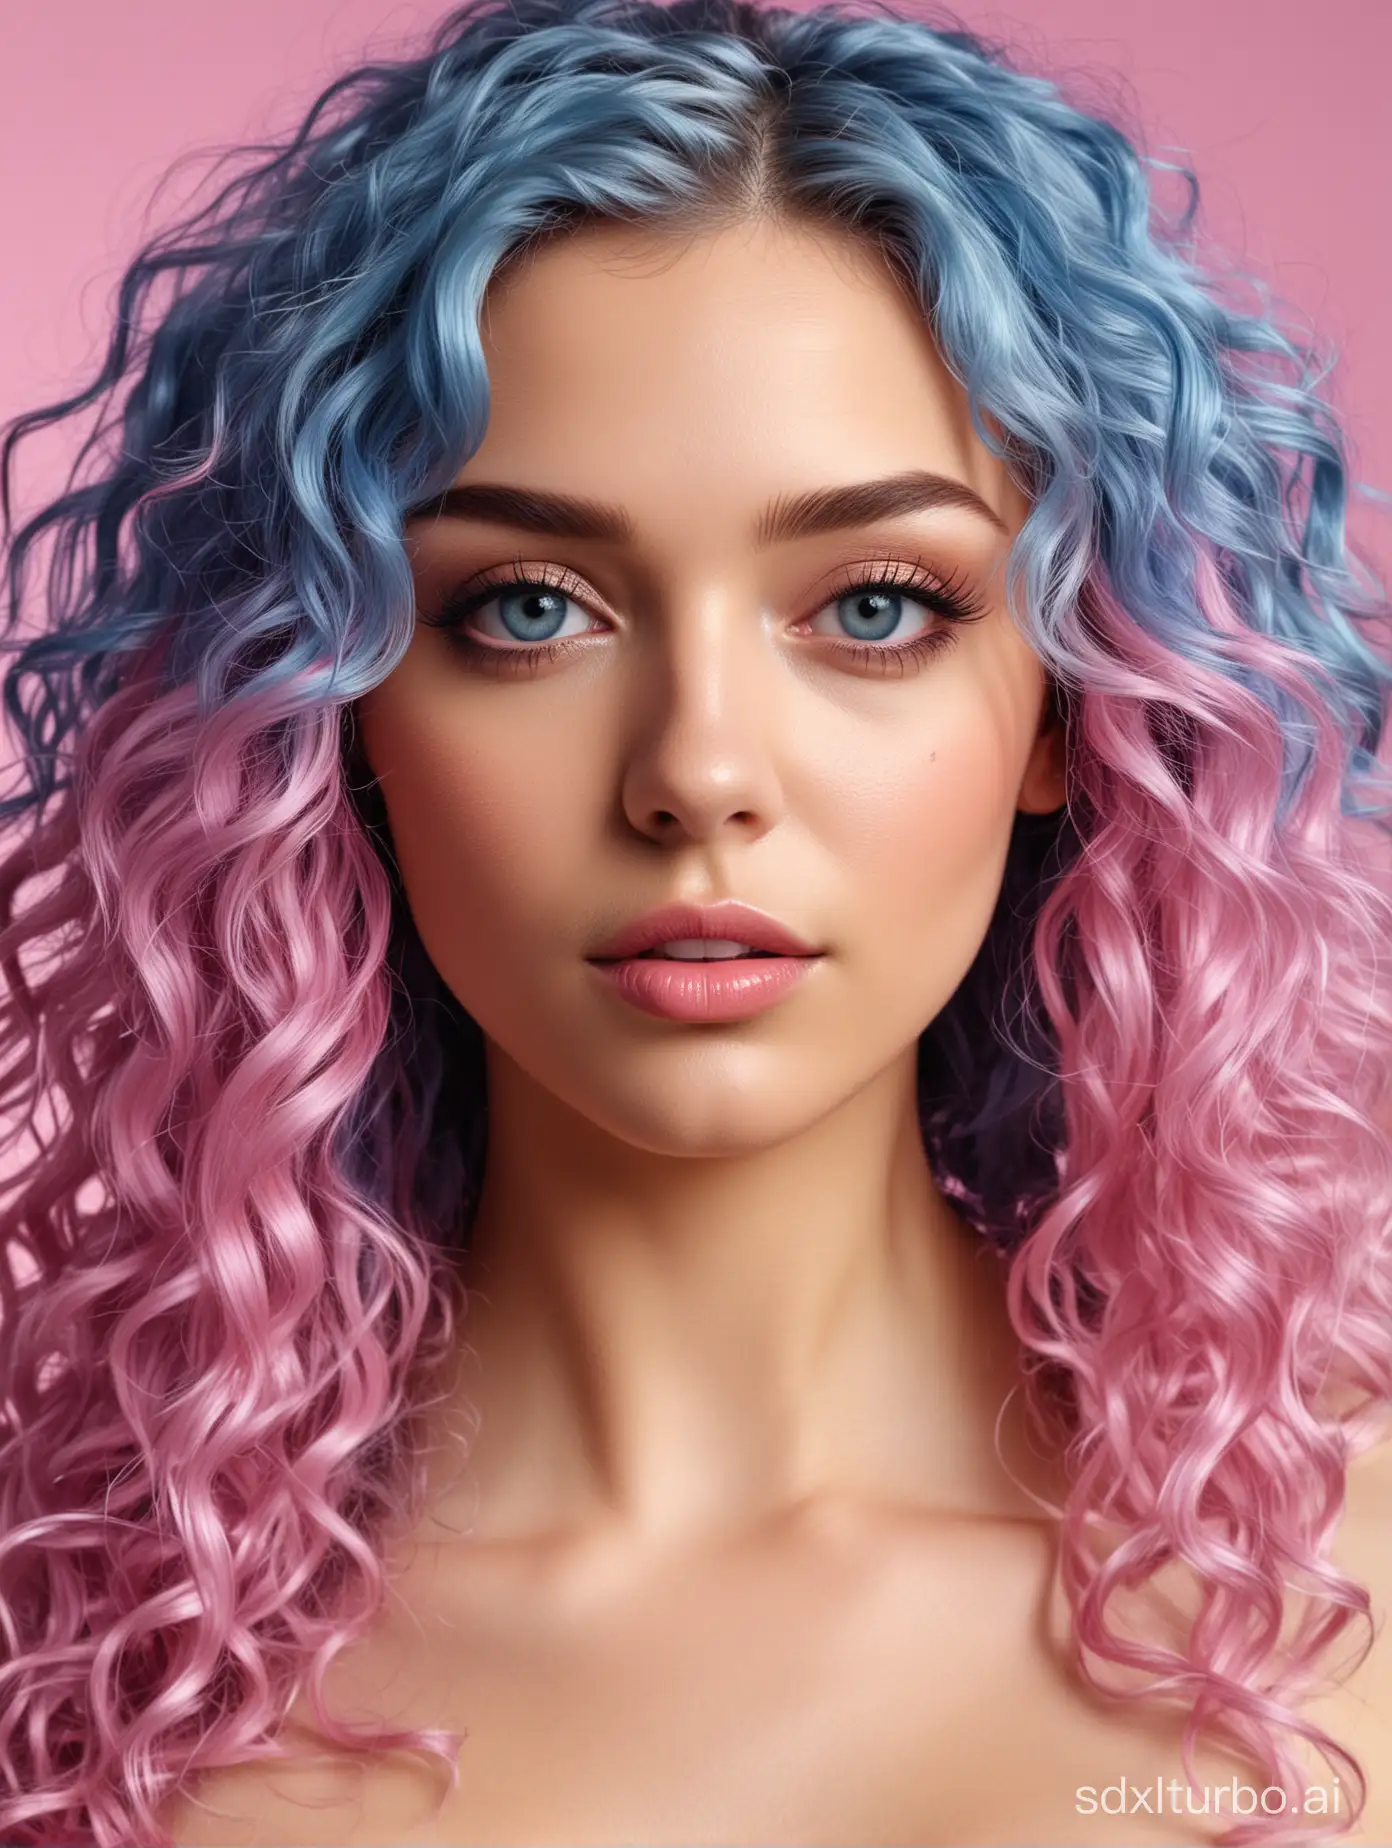 Fashion-Model-with-Blue-Curly-Hair-in-Studio-Portrait